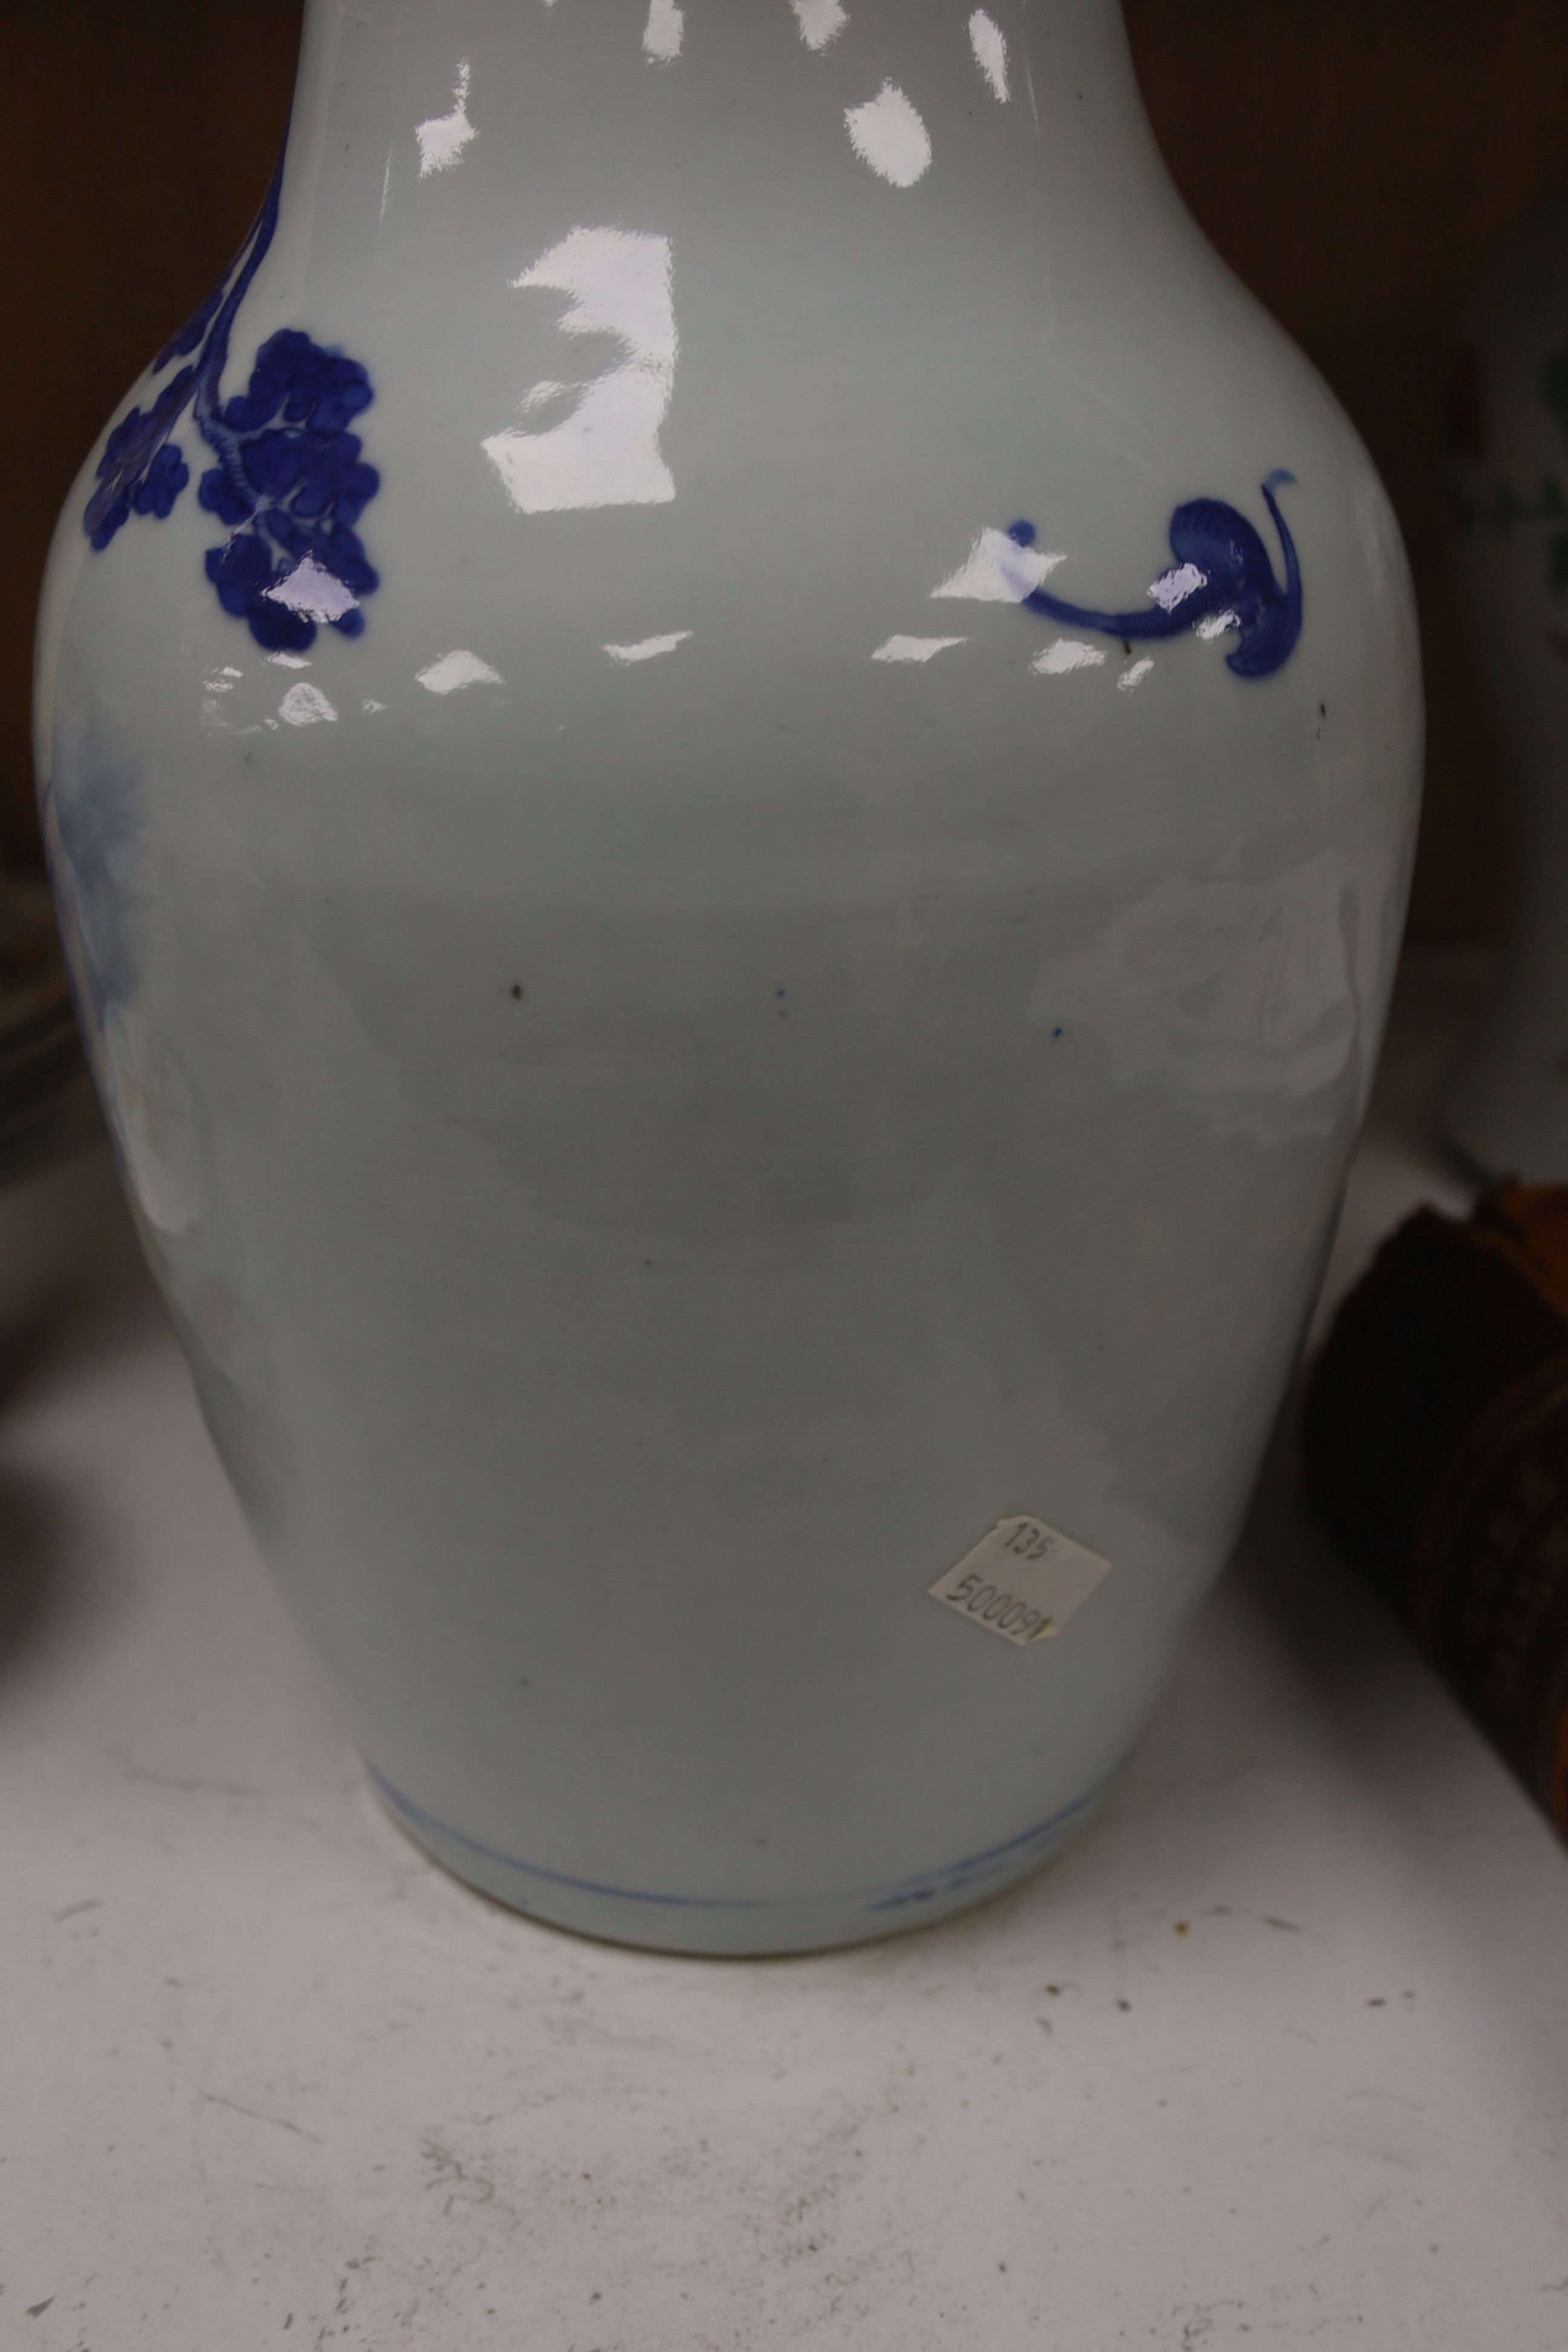 A Chinese blue and white 'Immortals' vase, 18th/19th century, damage, 34.5cm and a Chinese Yongzheng period famille rose ‘phoenix’ vase (reduced in height), 24cm